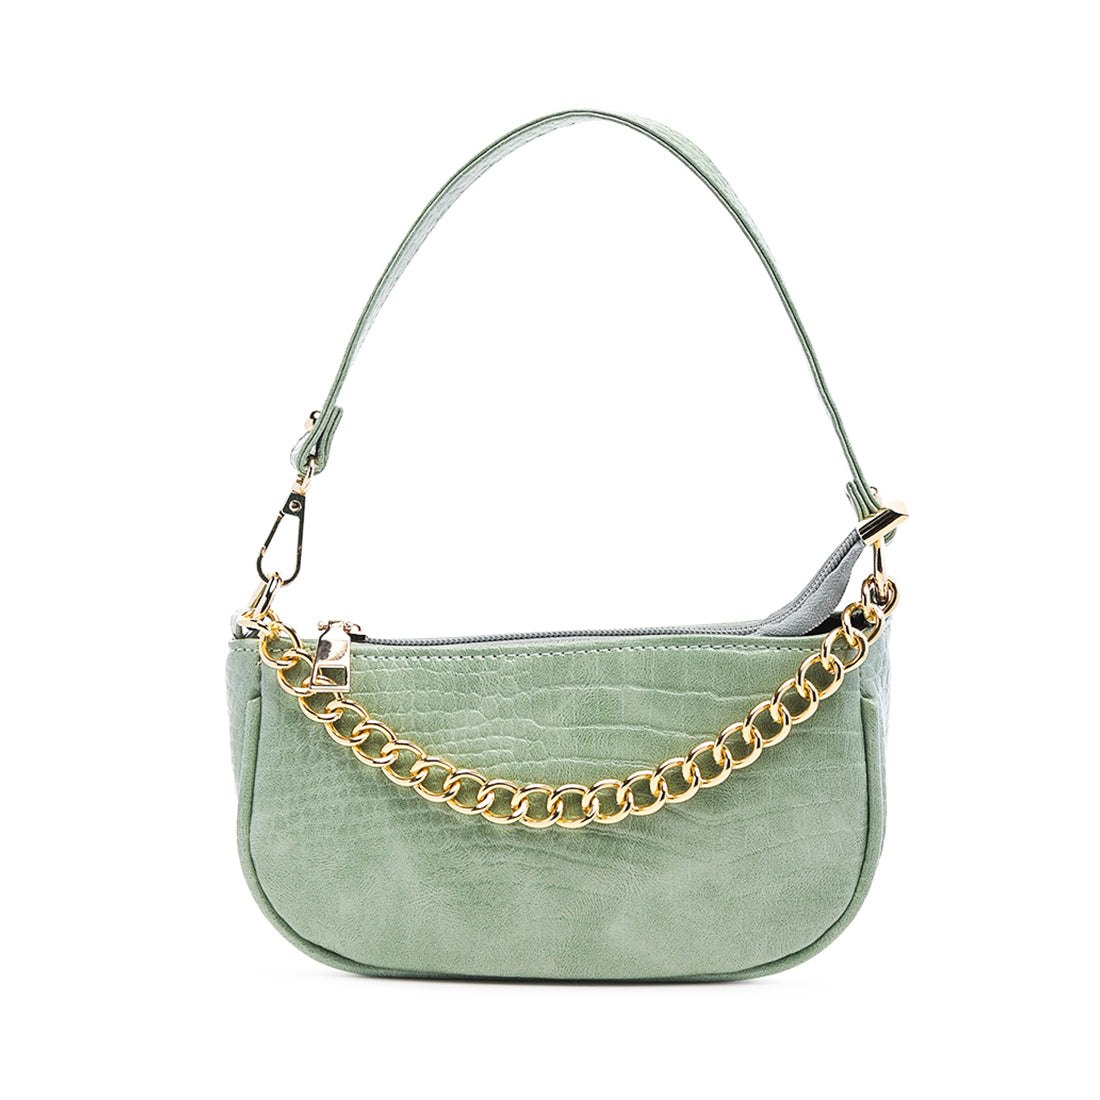 Sling Bag in Mint Green - One Size